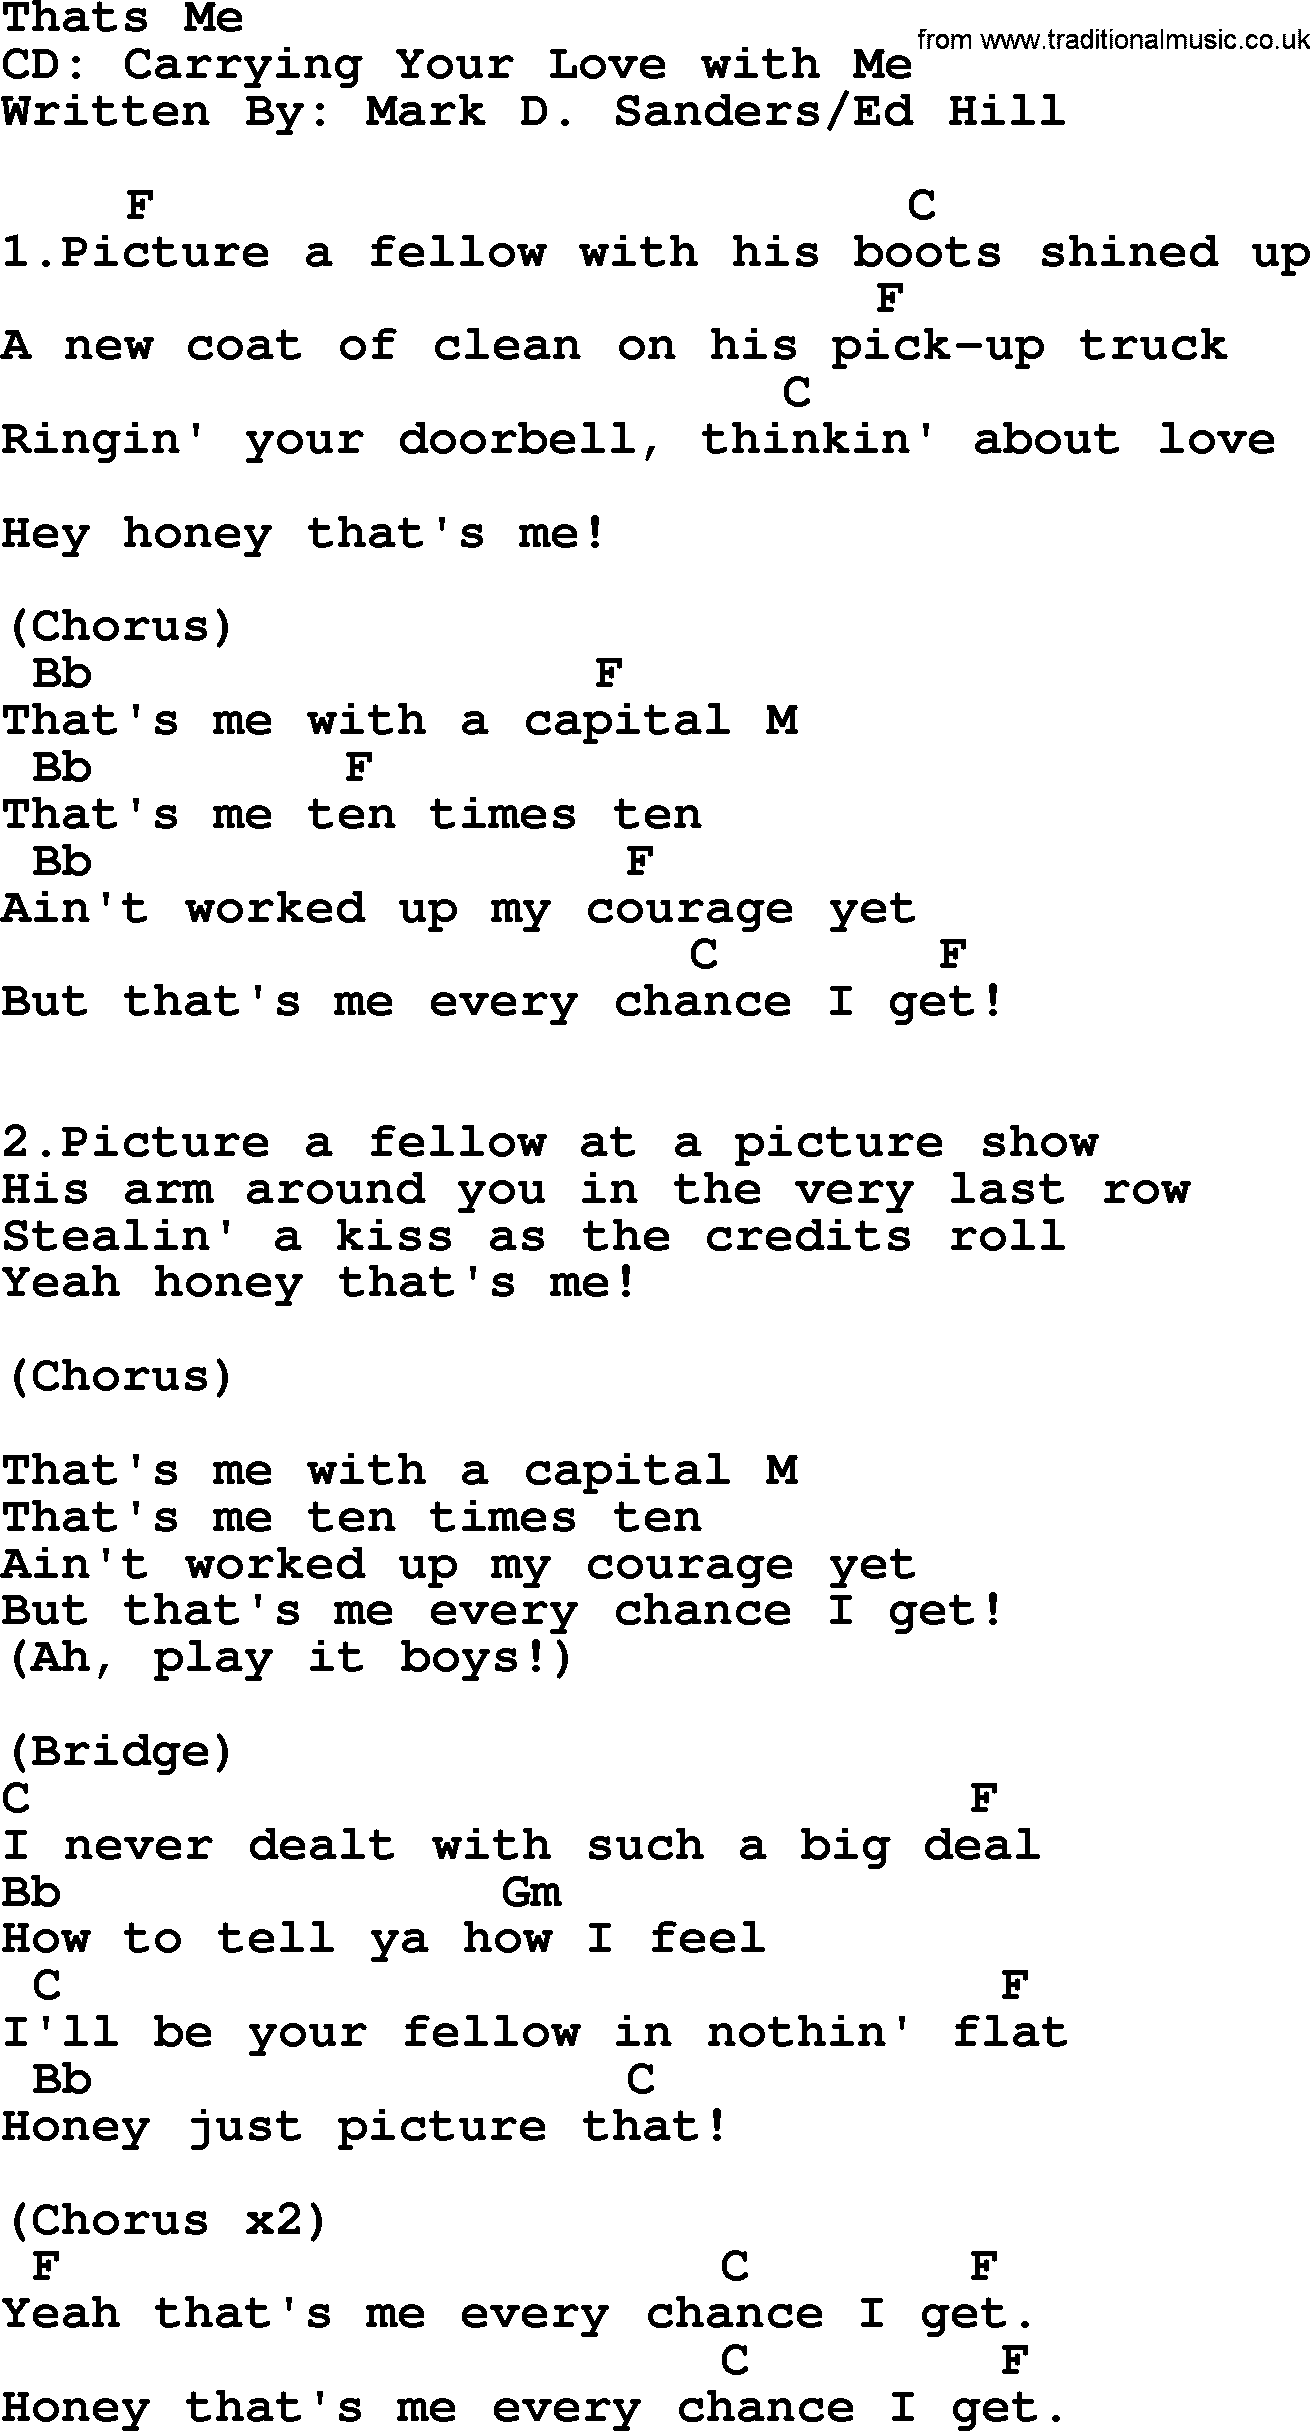 George Strait song: Thats Me, lyrics and chords